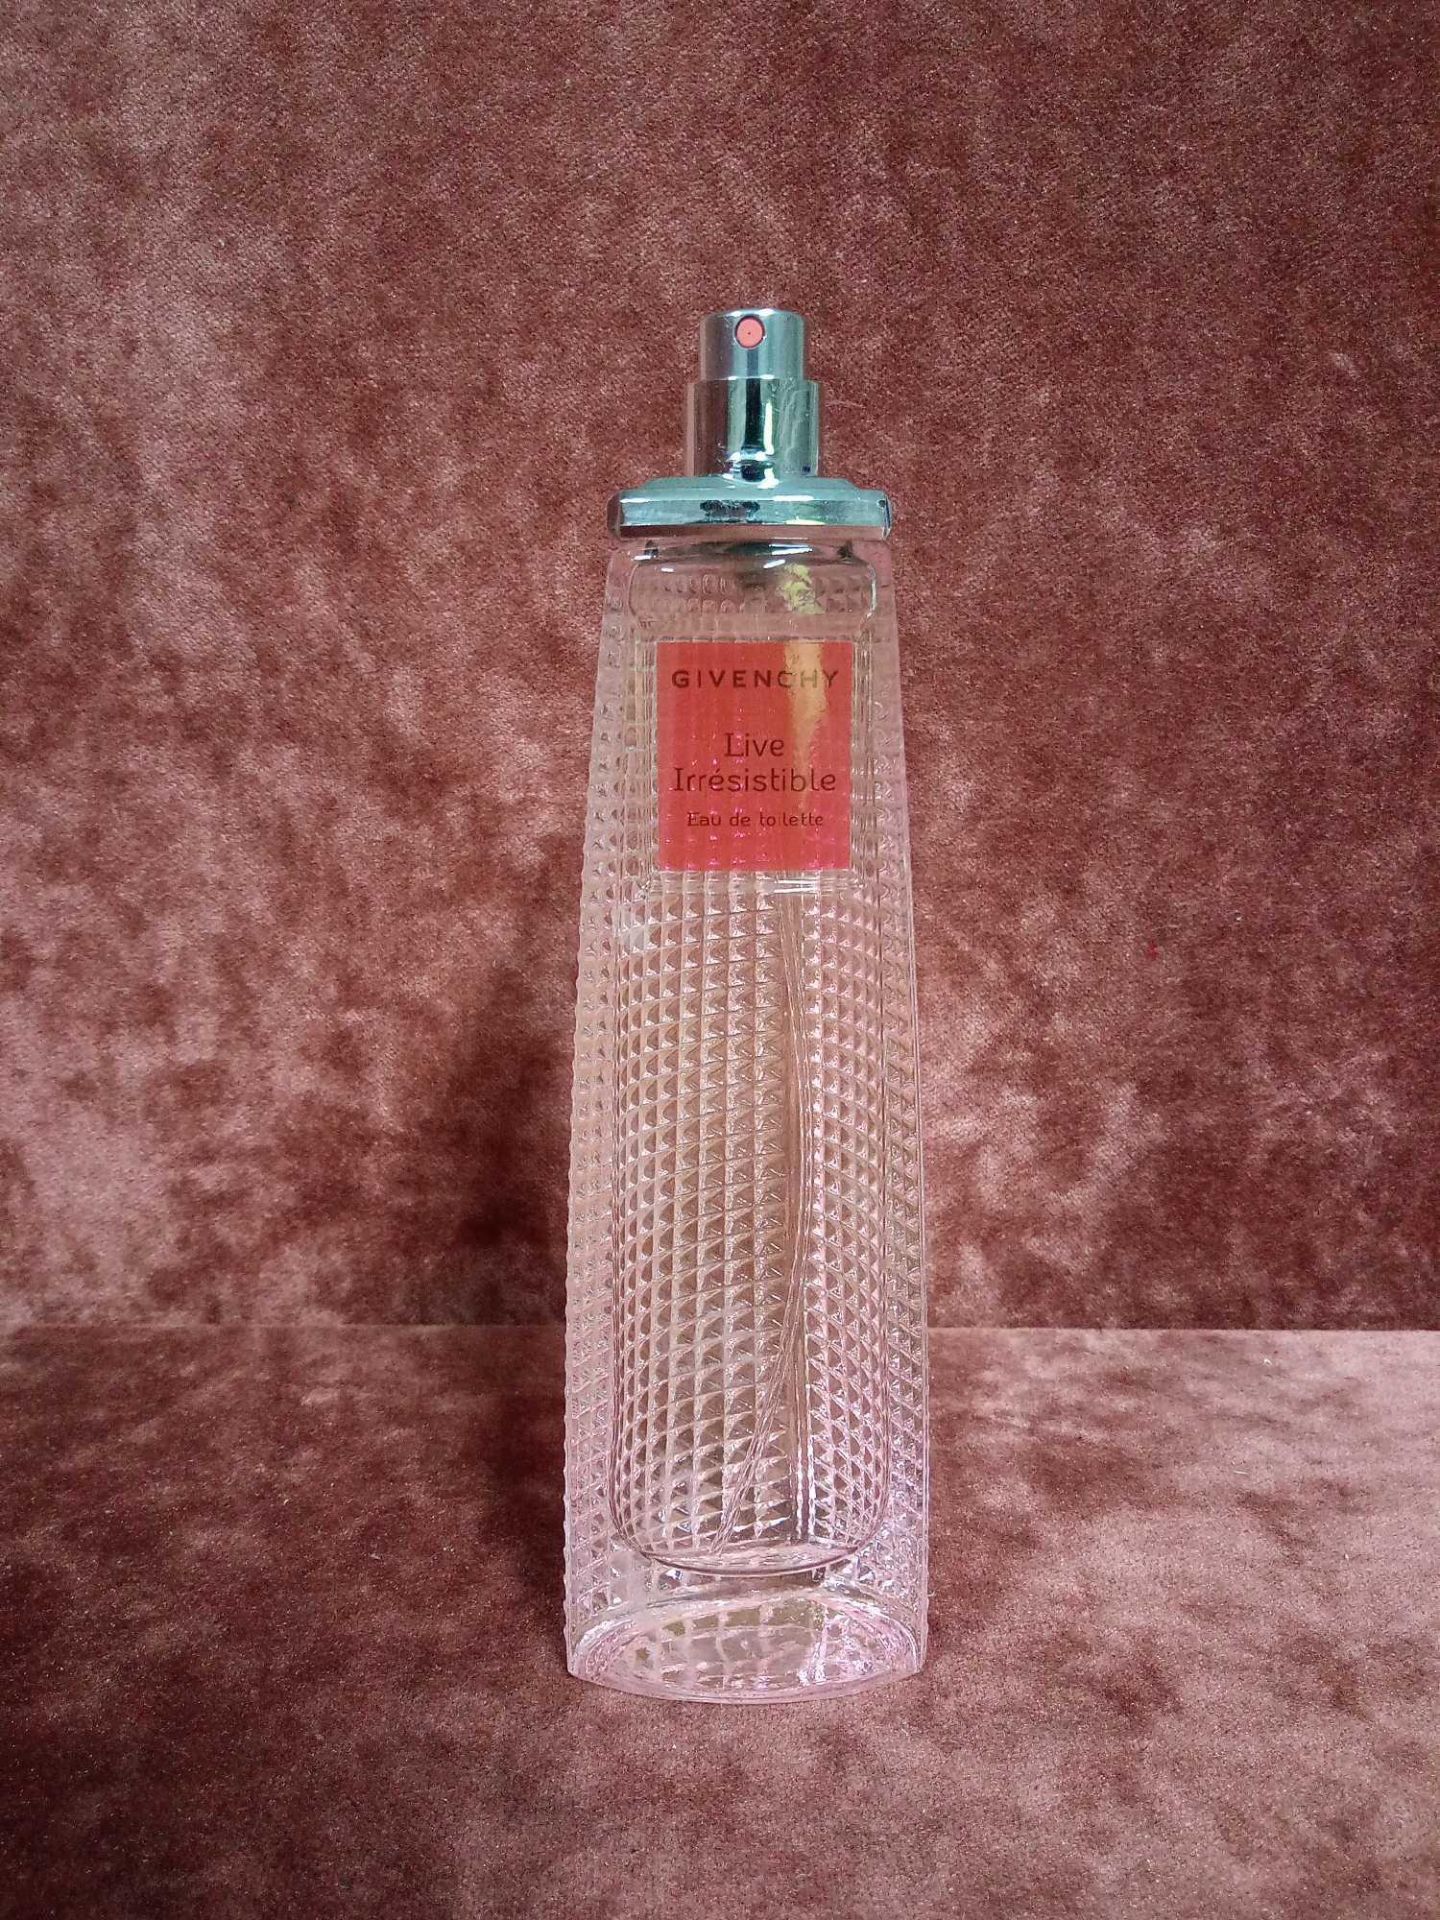 RRP £65 Boxed 75Ml Tester Bottle Of Givenchy Live Irresistible Eau De Toilette Spray Ex Display